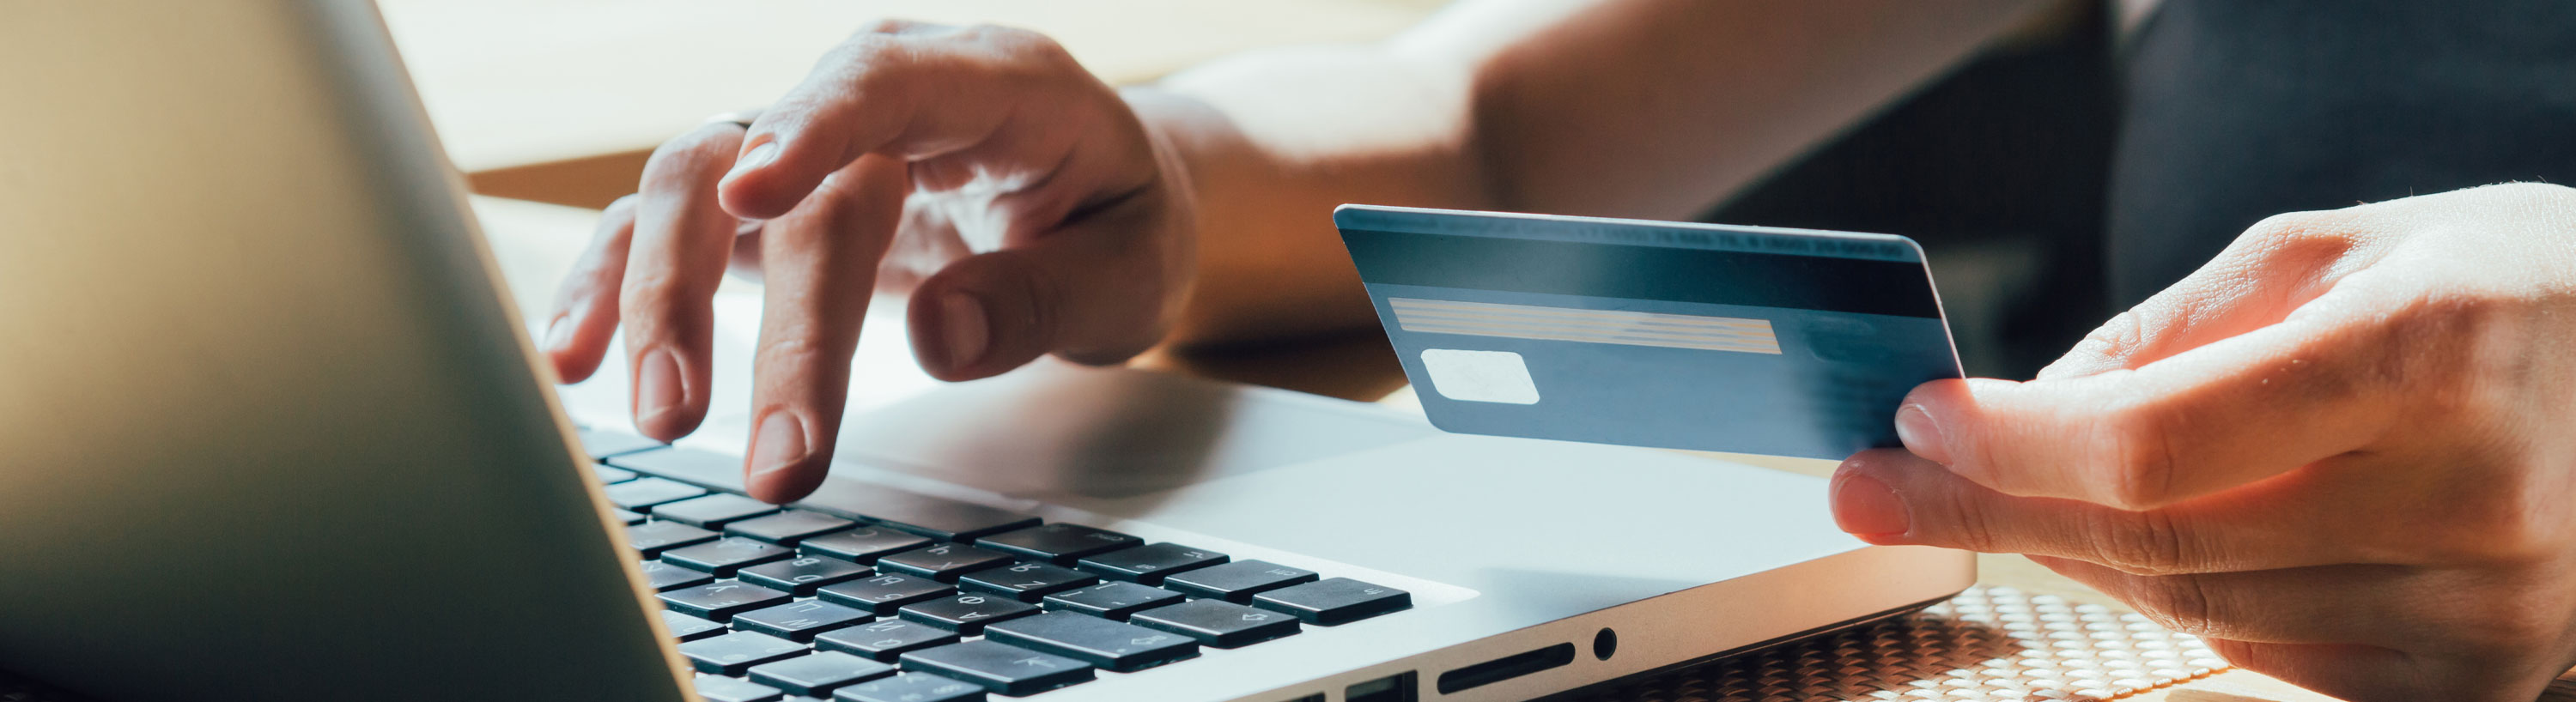 Banner picture of a man holding a debit card in one hand and his other hand is on the keyboard of his open laptop.